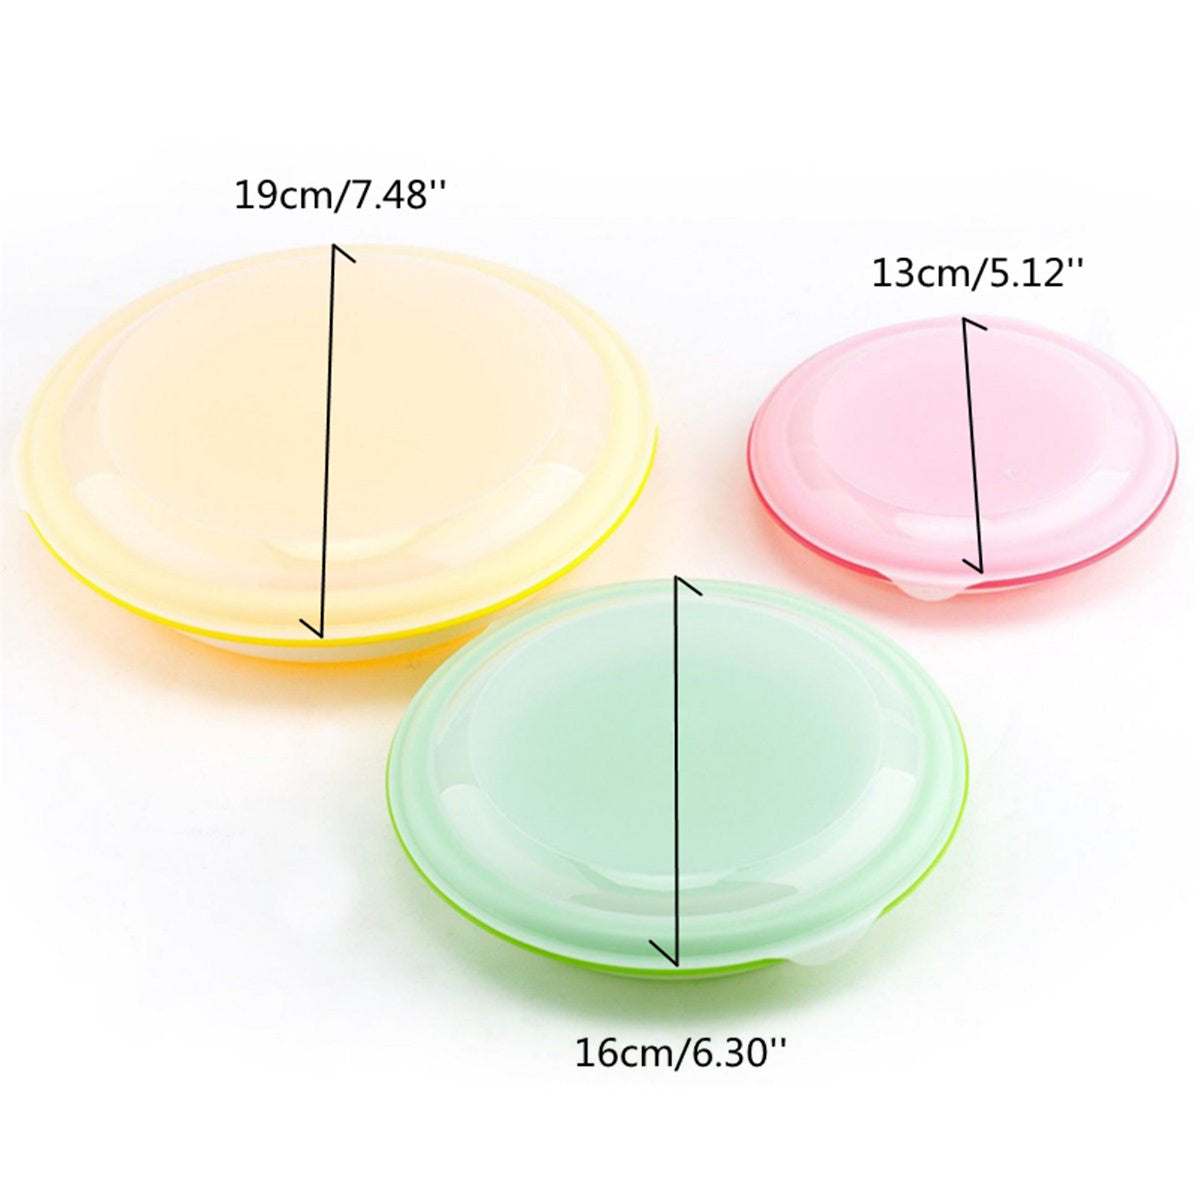 Rainbow Round Food Container - Meal Prep Gear Shop